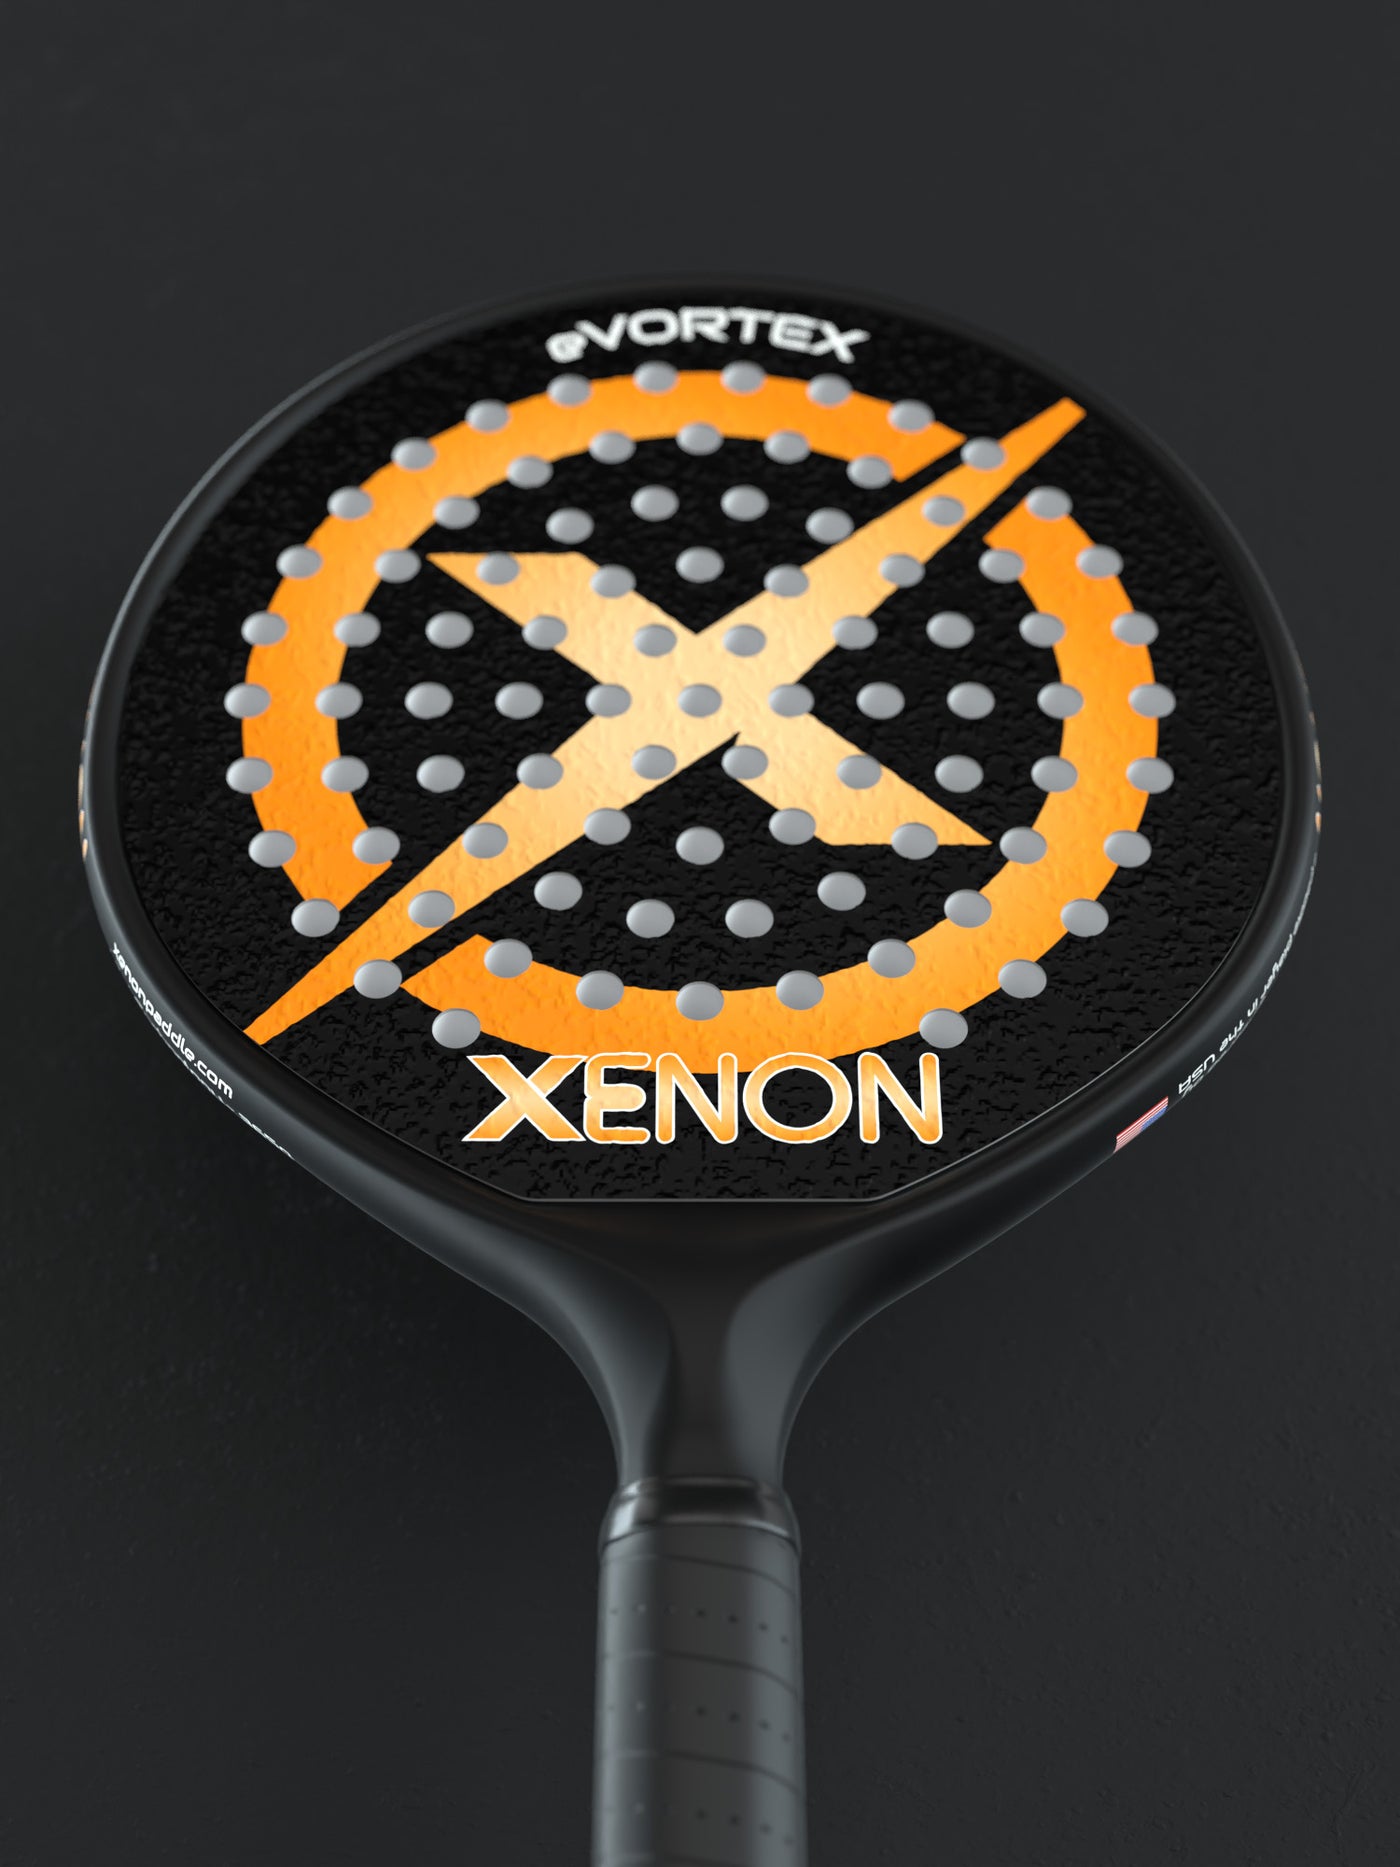 eVortex - Paddle Tennis Racket With Heated Handle by Xenon Paddle Angle View 3